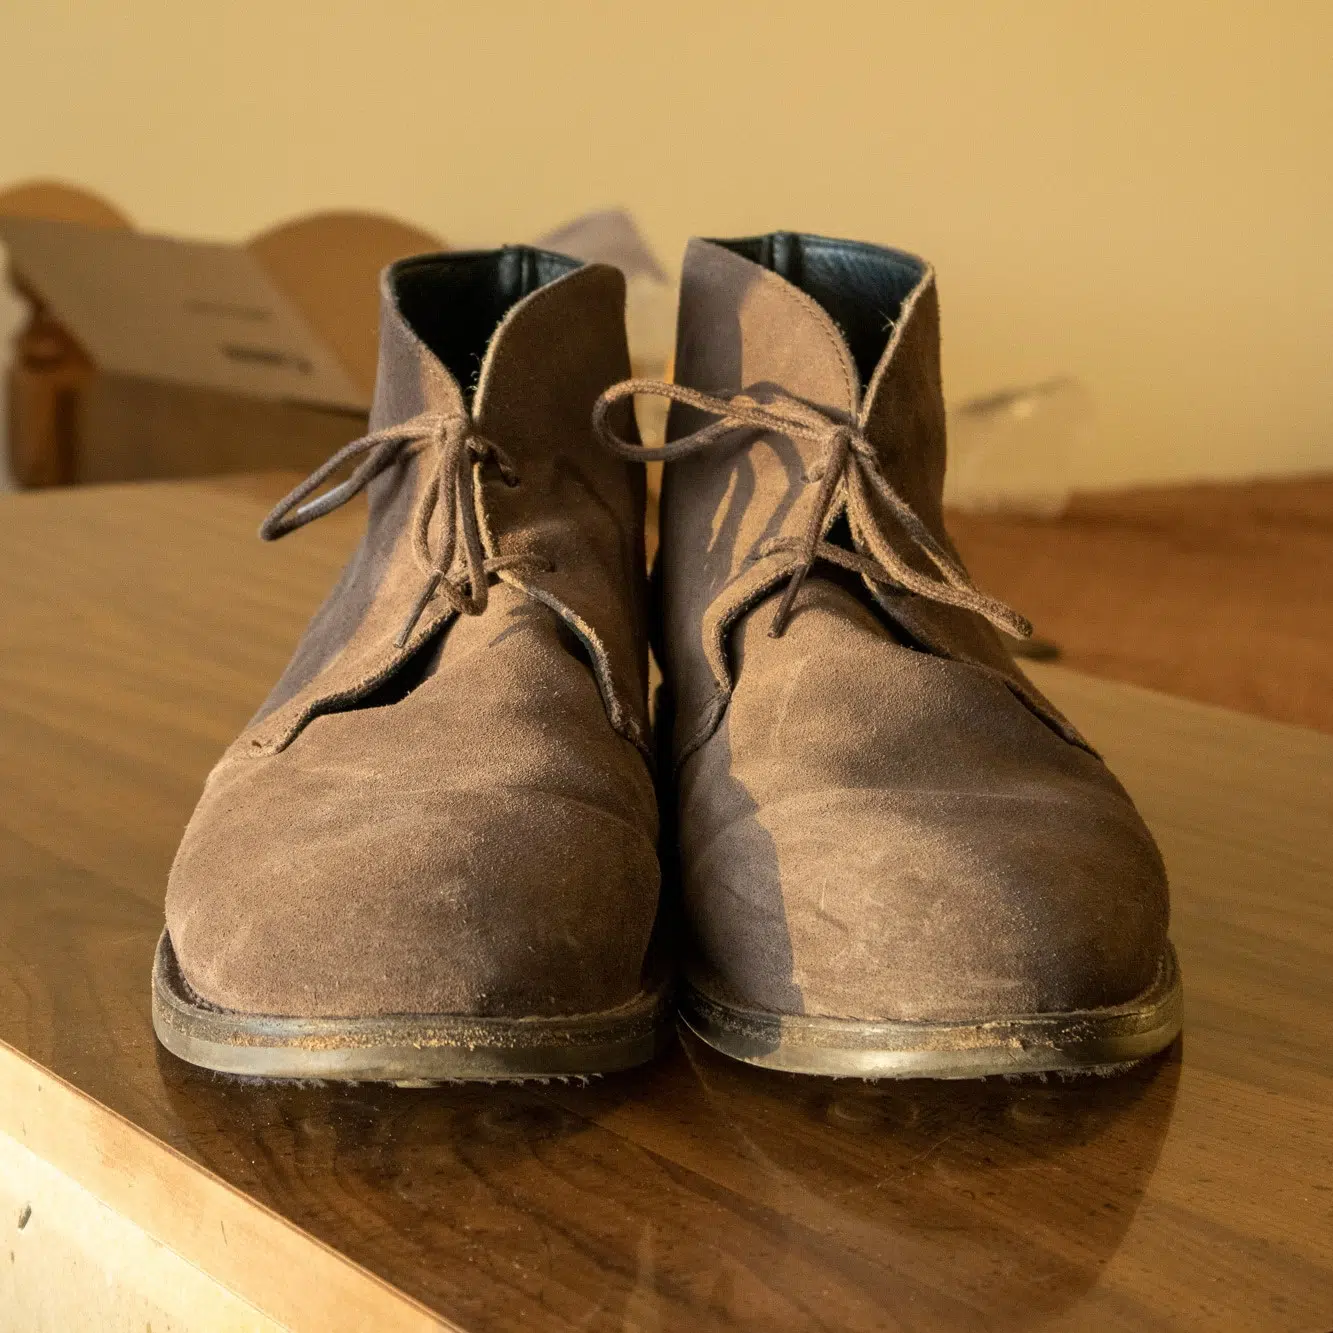 Thursday Scout Chukka Review